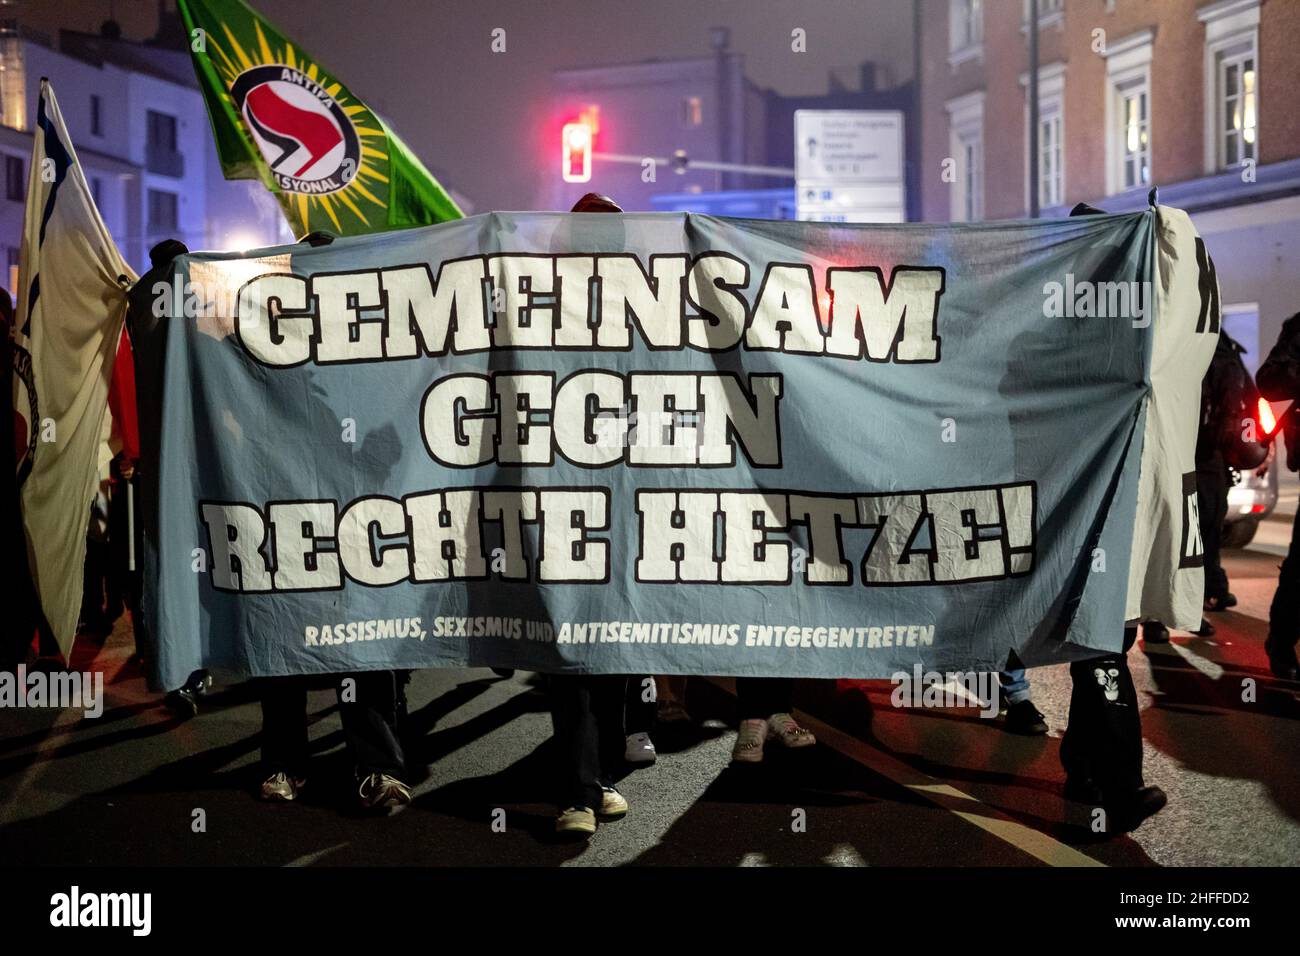 On January 15, 2022 a few hundreds antifascists gathered in Rosenheim, southern Germany to protest against the AfD bureau of Andreas Winhart and Franz-Xaver Bergmueller. The protestors lit pyrotechnics. (Photo by Alexander Pohl/Sipa USA) Stock Photo